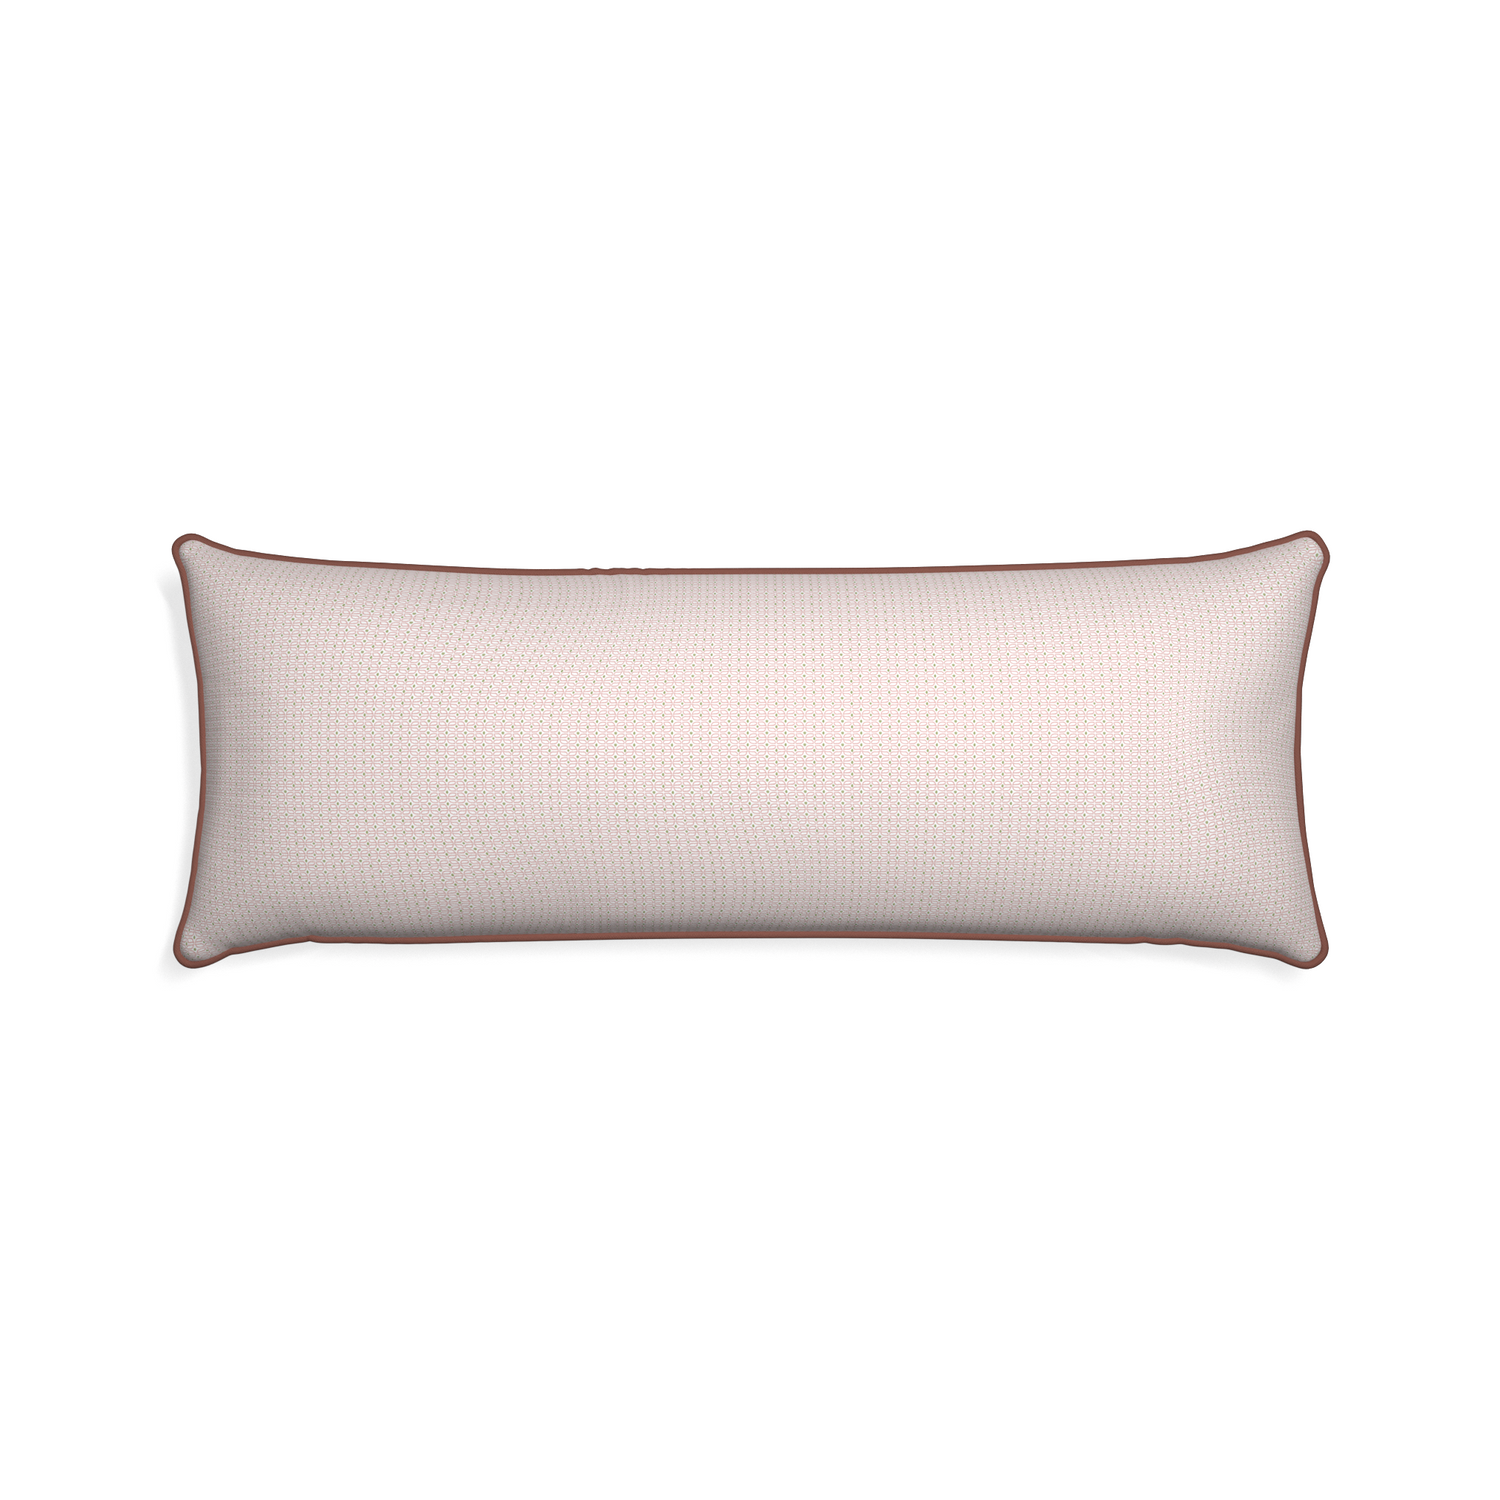 Xl-lumbar loomi pink custom pillow with w piping on white background